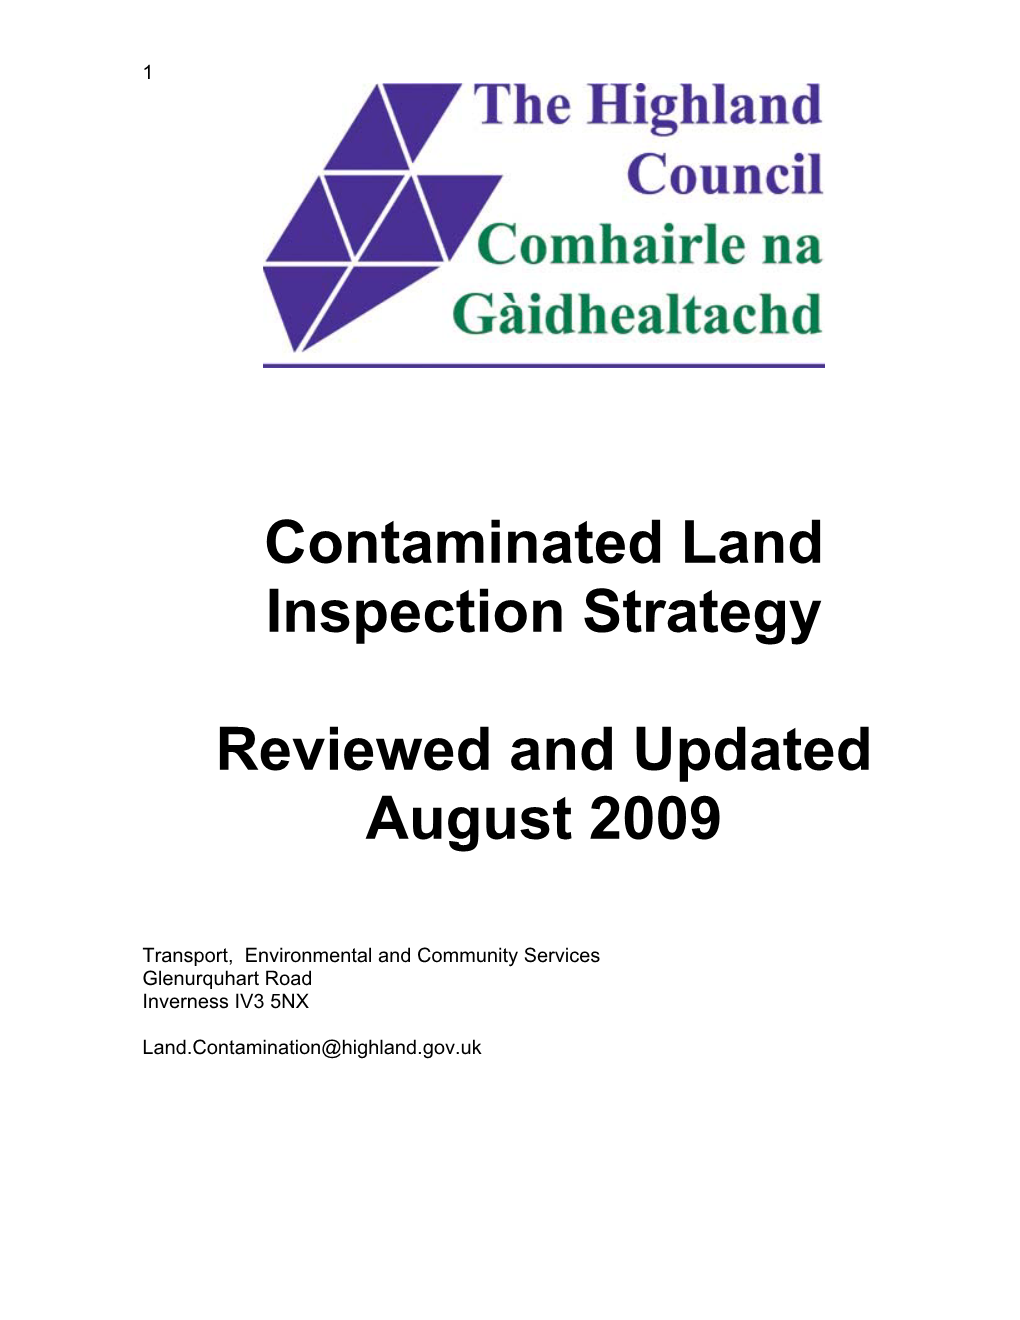 The Highland Council Contaminated Land Inspection Strategy August 2009